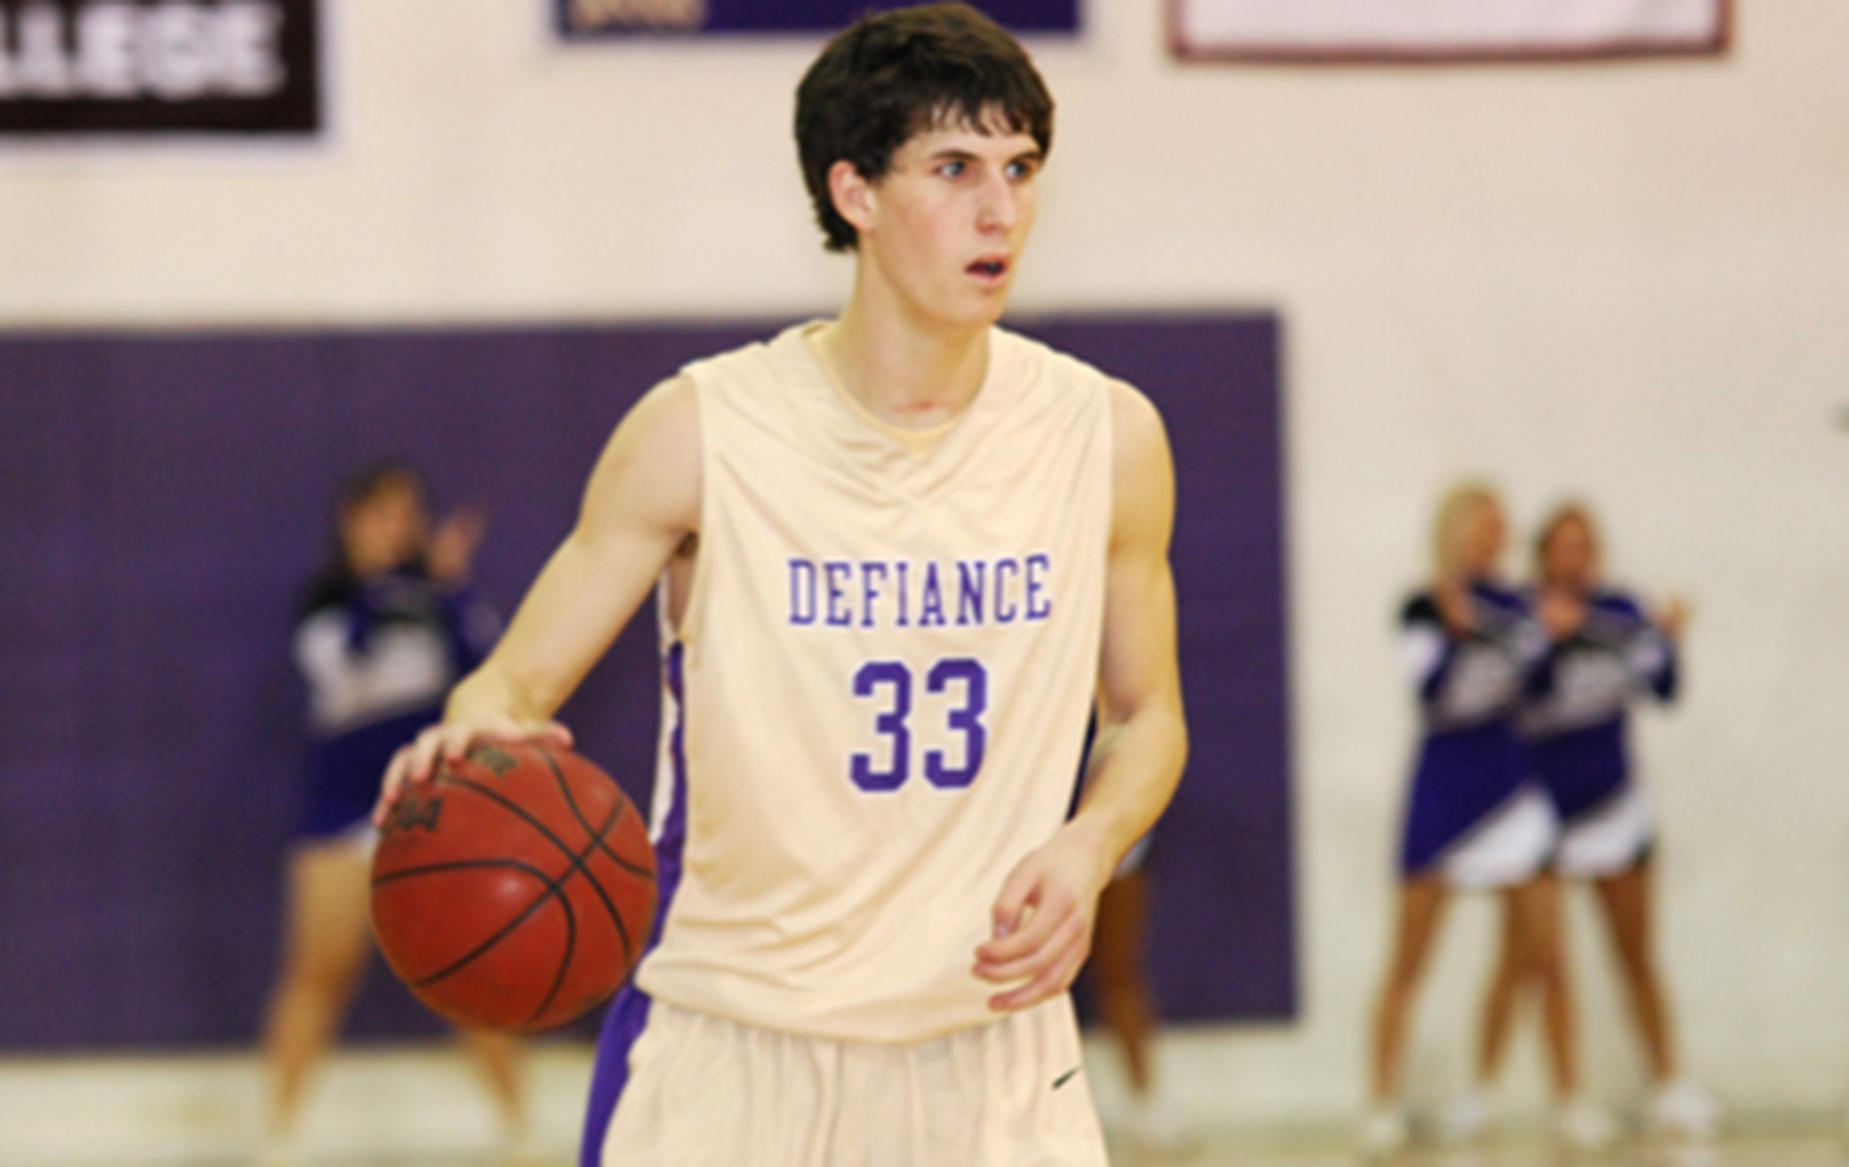 Wolfrum Makes History as DC Edges Bluffton in Overtime